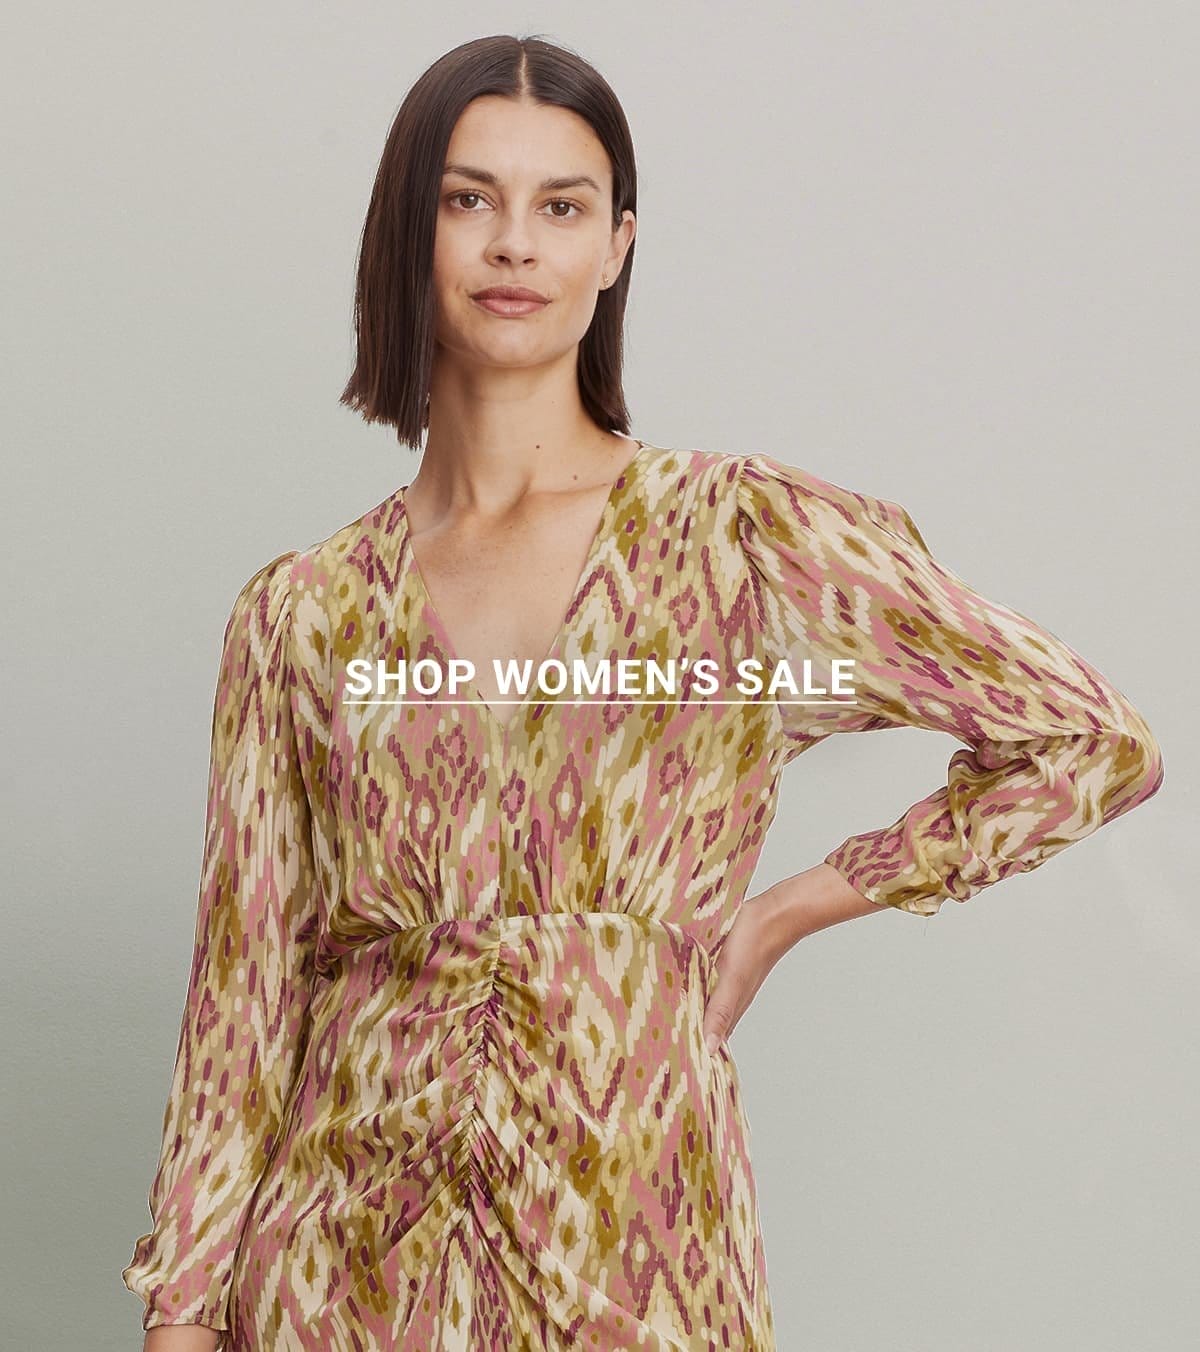 SHOP WOMEN'S SALE. Model wearing the Cailey Printed Dress